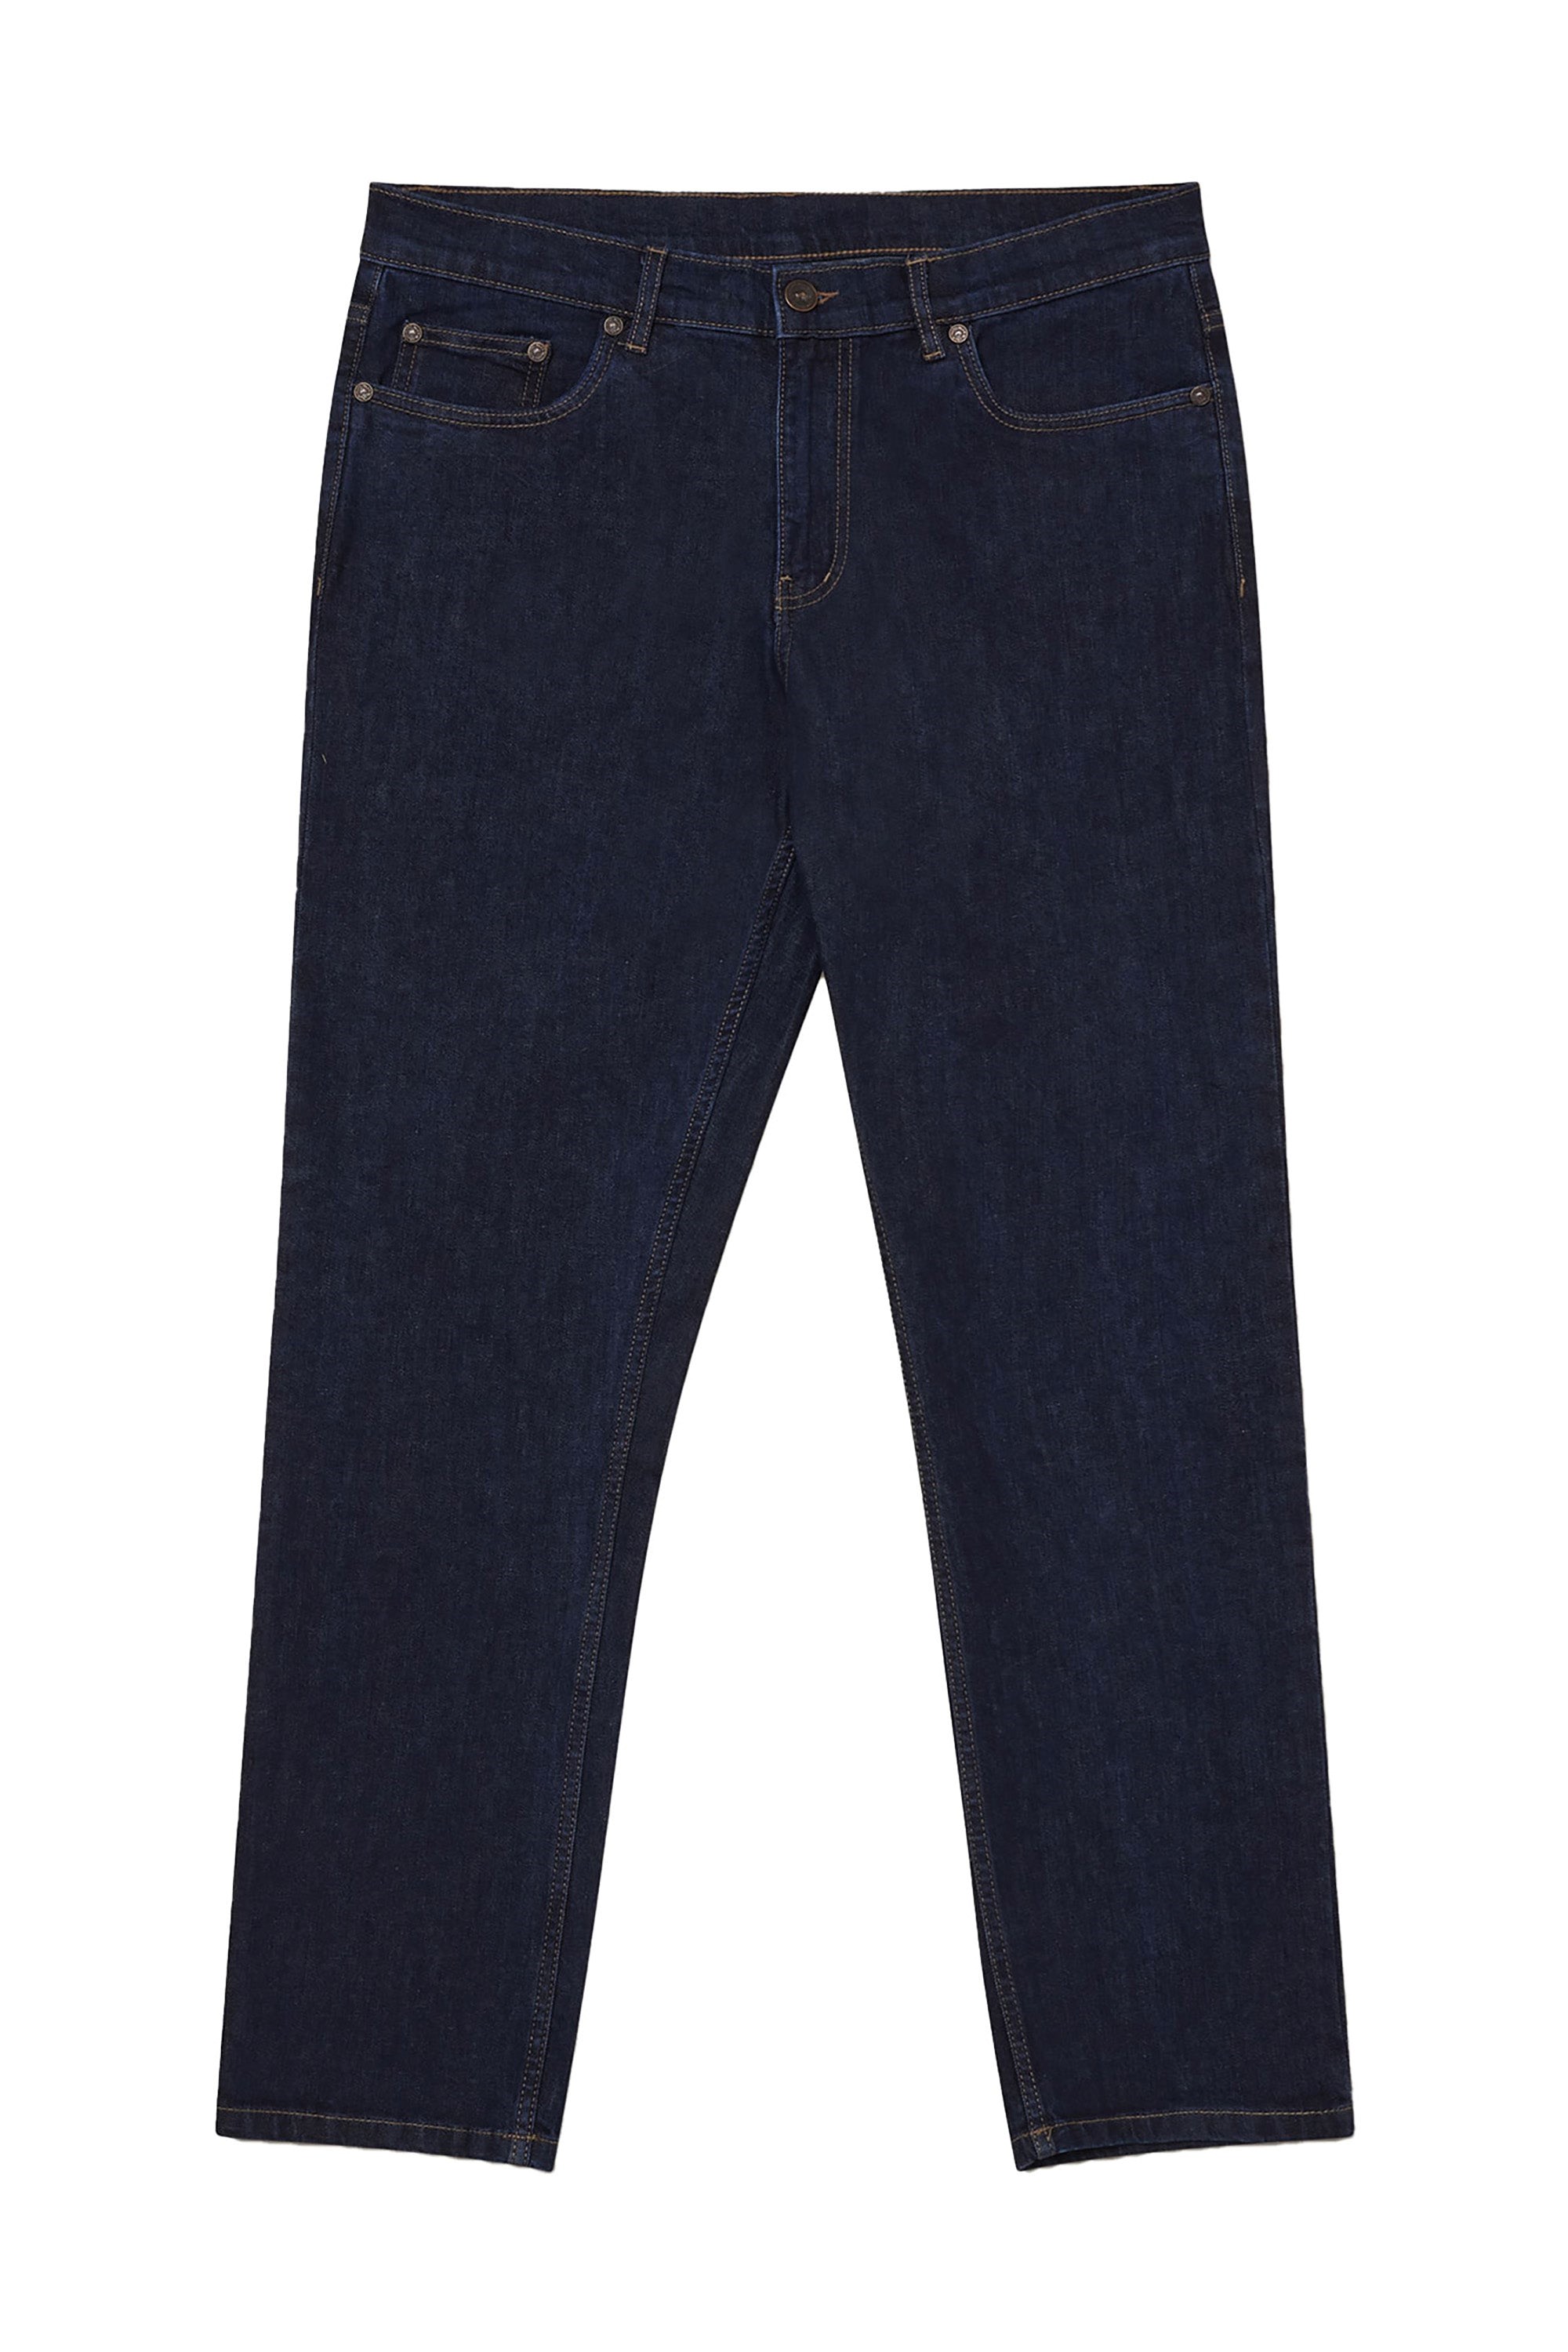 Tapered Mens Jean -